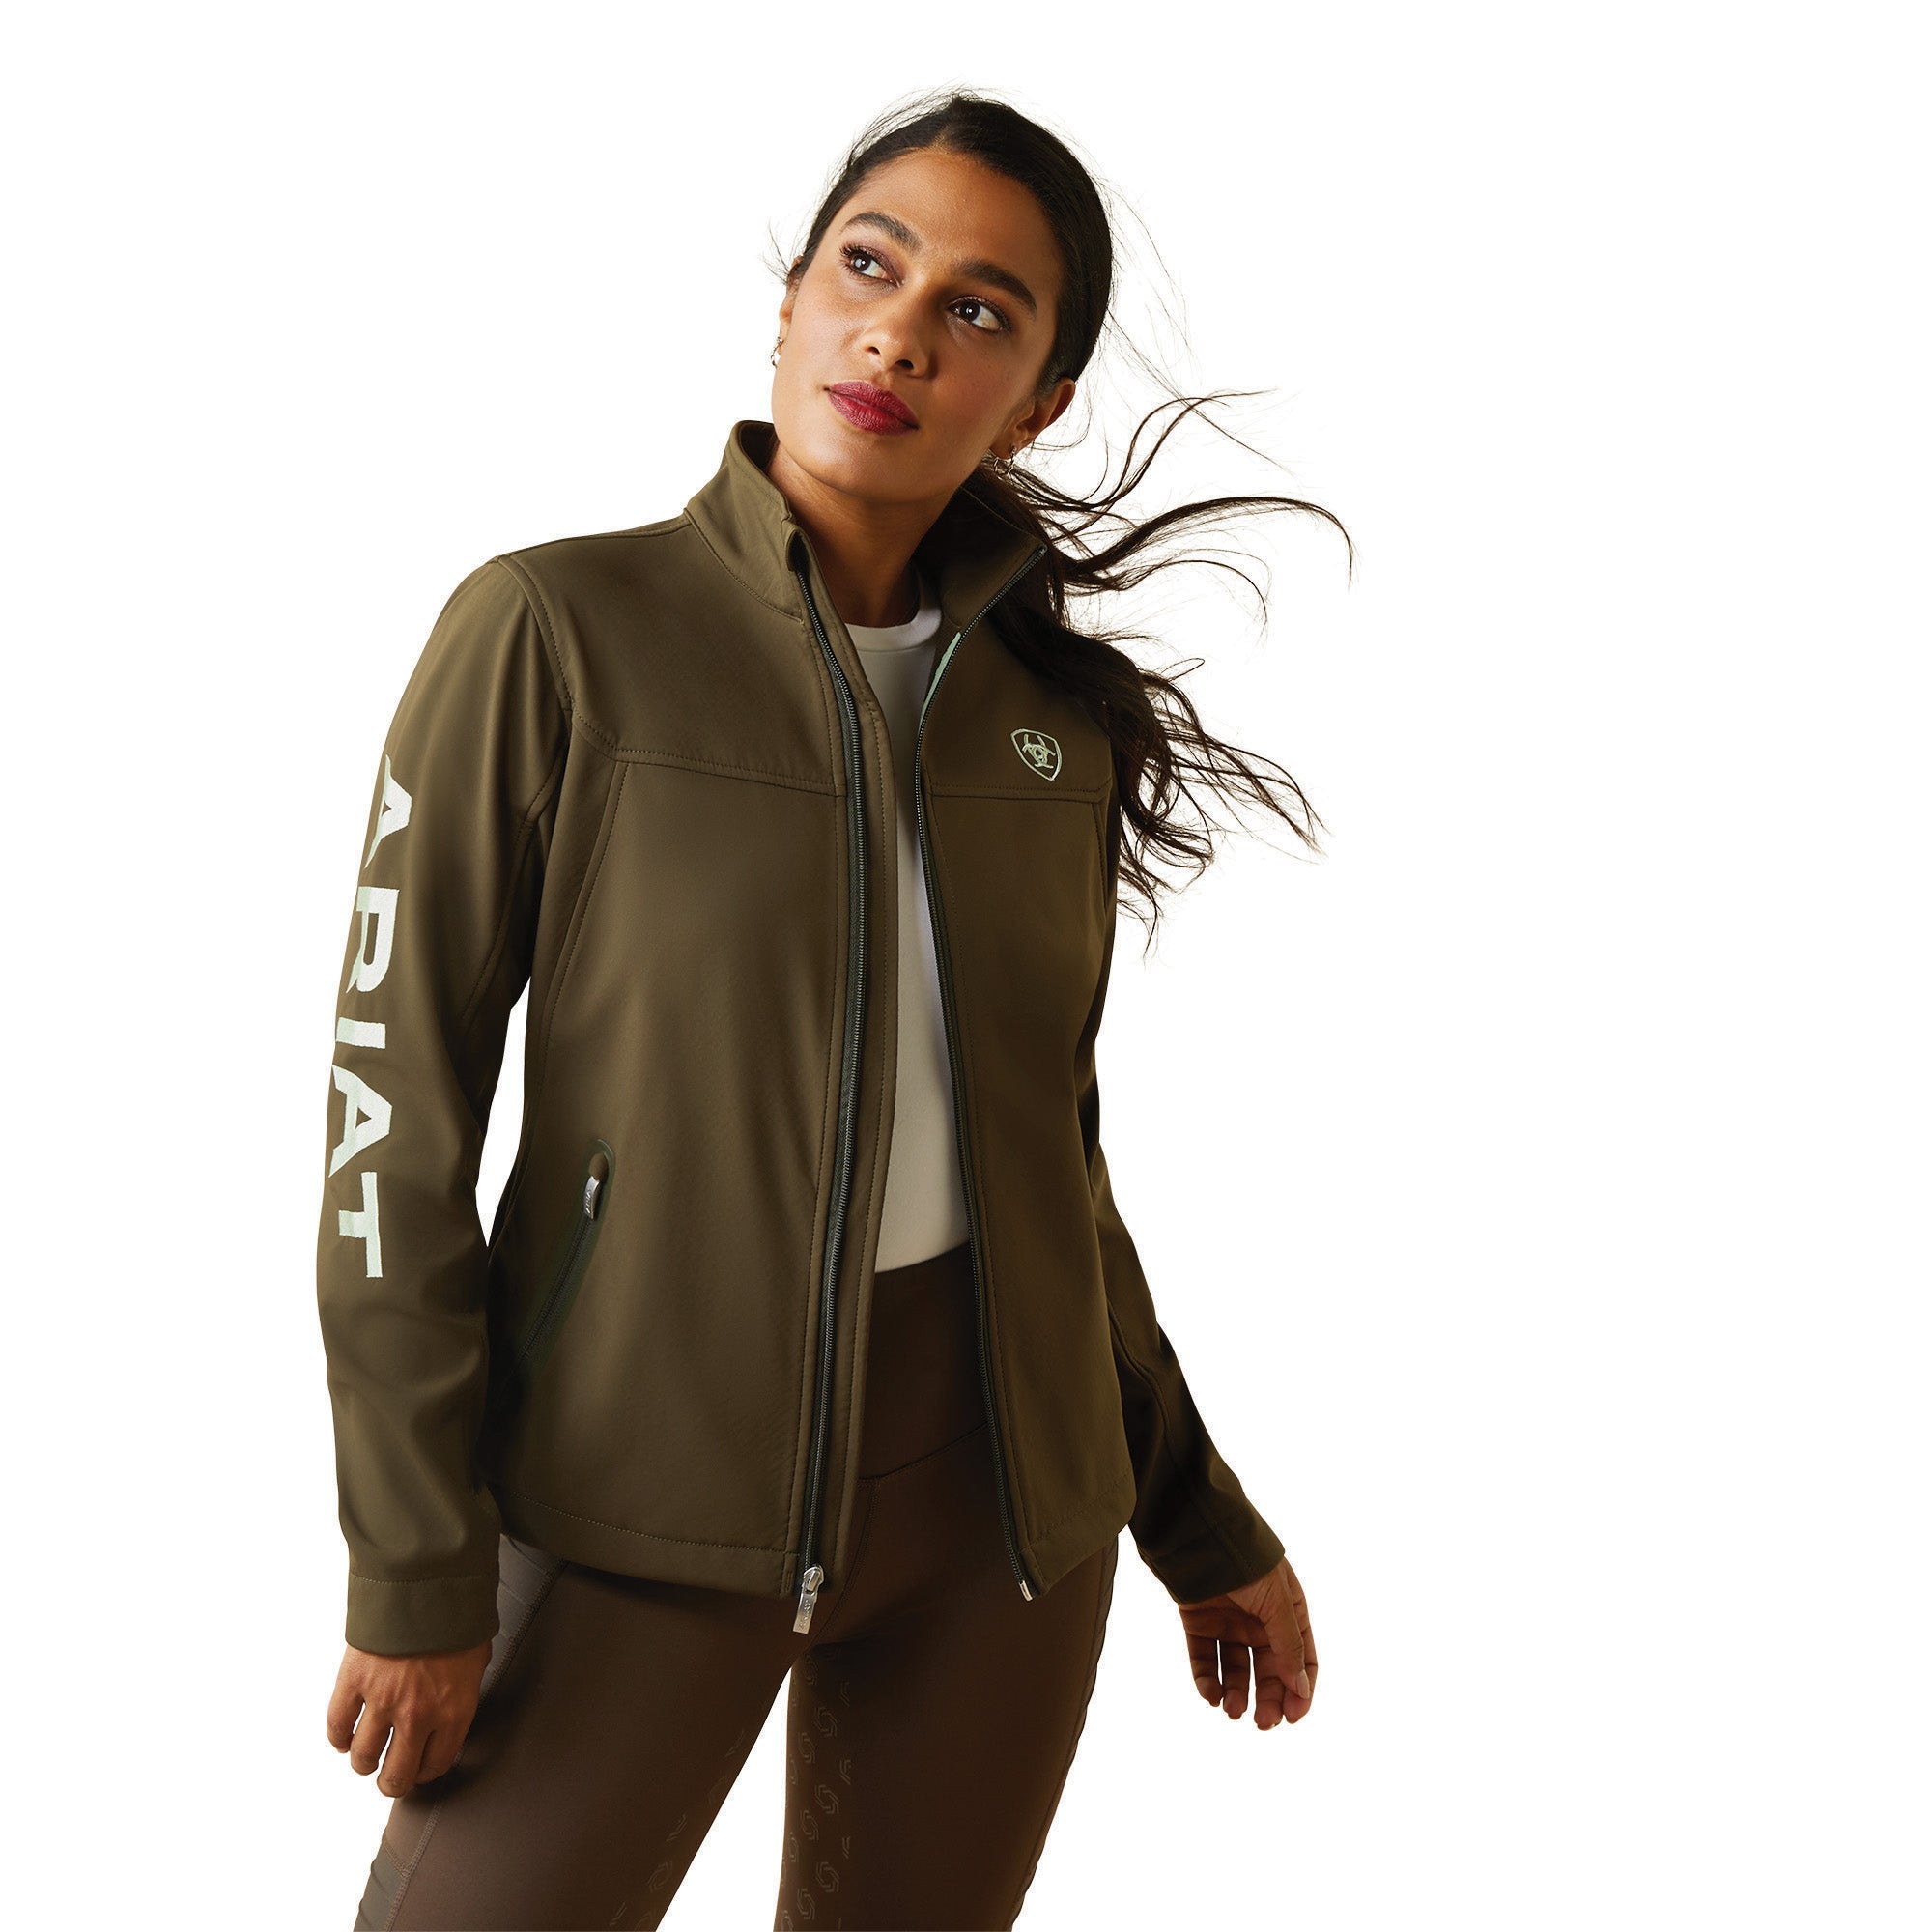 Image of Women's Ariat Relic Team Softshell Jacket.